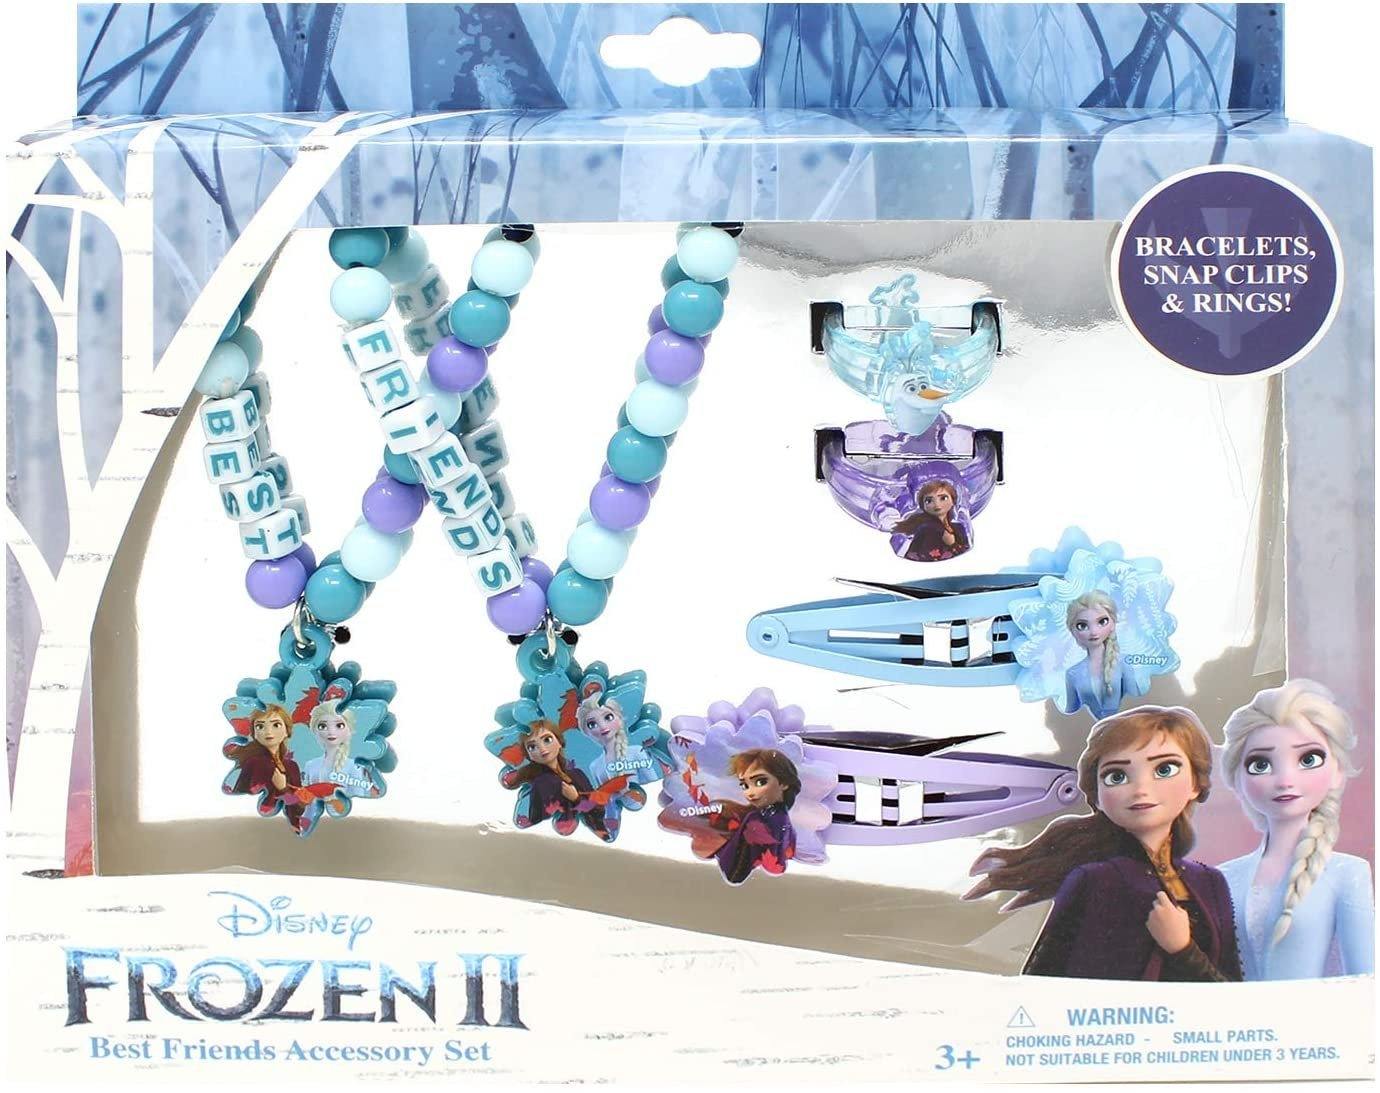 Frozen 2 Girls Accessories and Jewelry Box Set